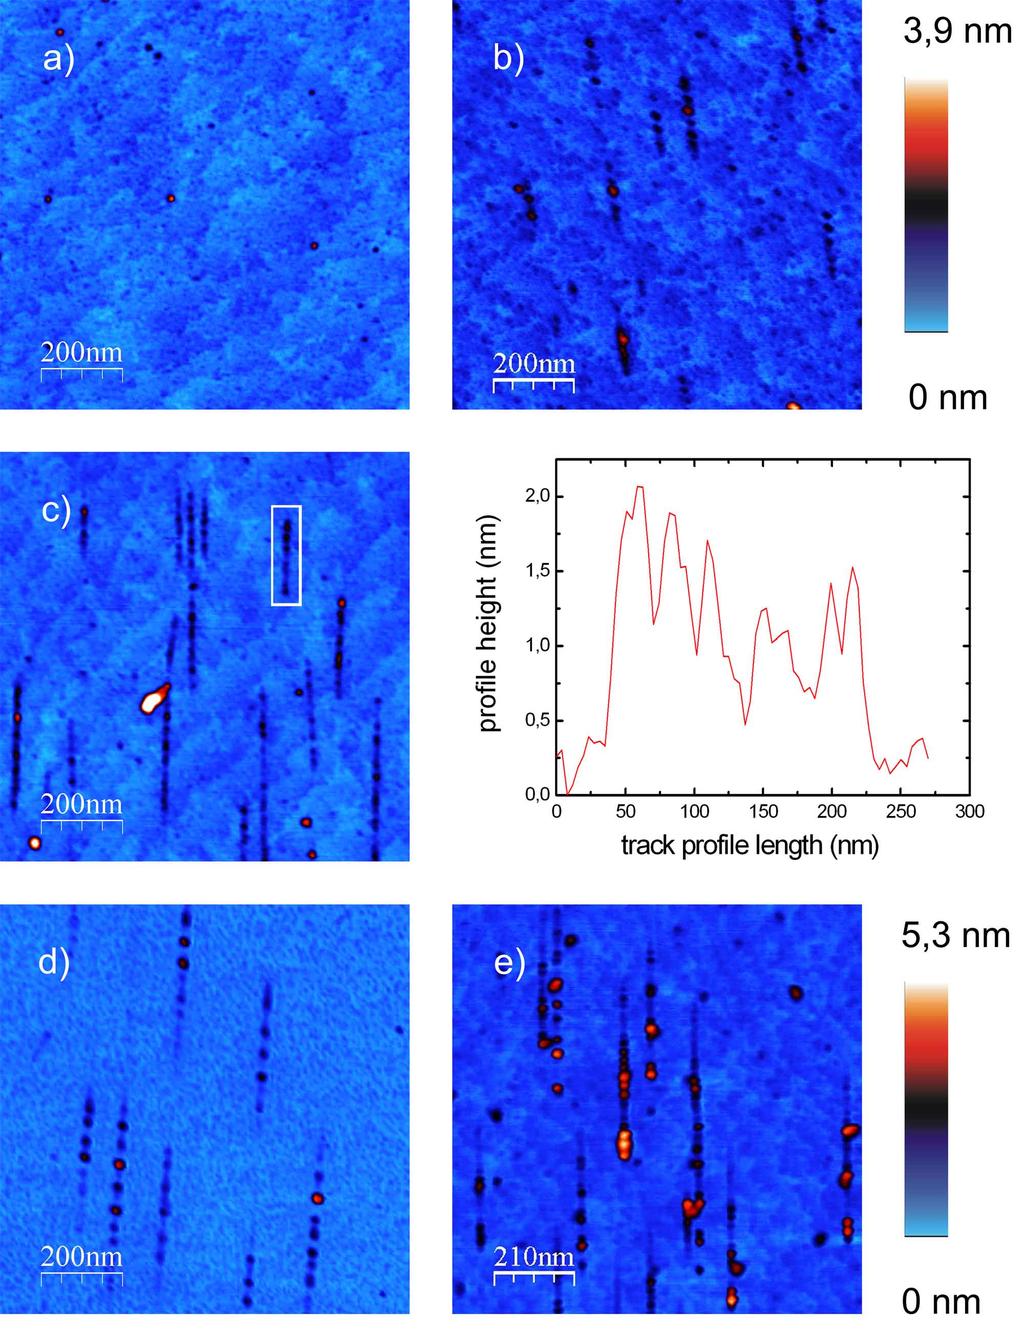 Figure 1: Topography images of a SrTiO 3 surface irradiated with different energy losses under grazing incidence. I ions under 1.3 o were used in a)-c), Xe ions under 1 o in d) and e).